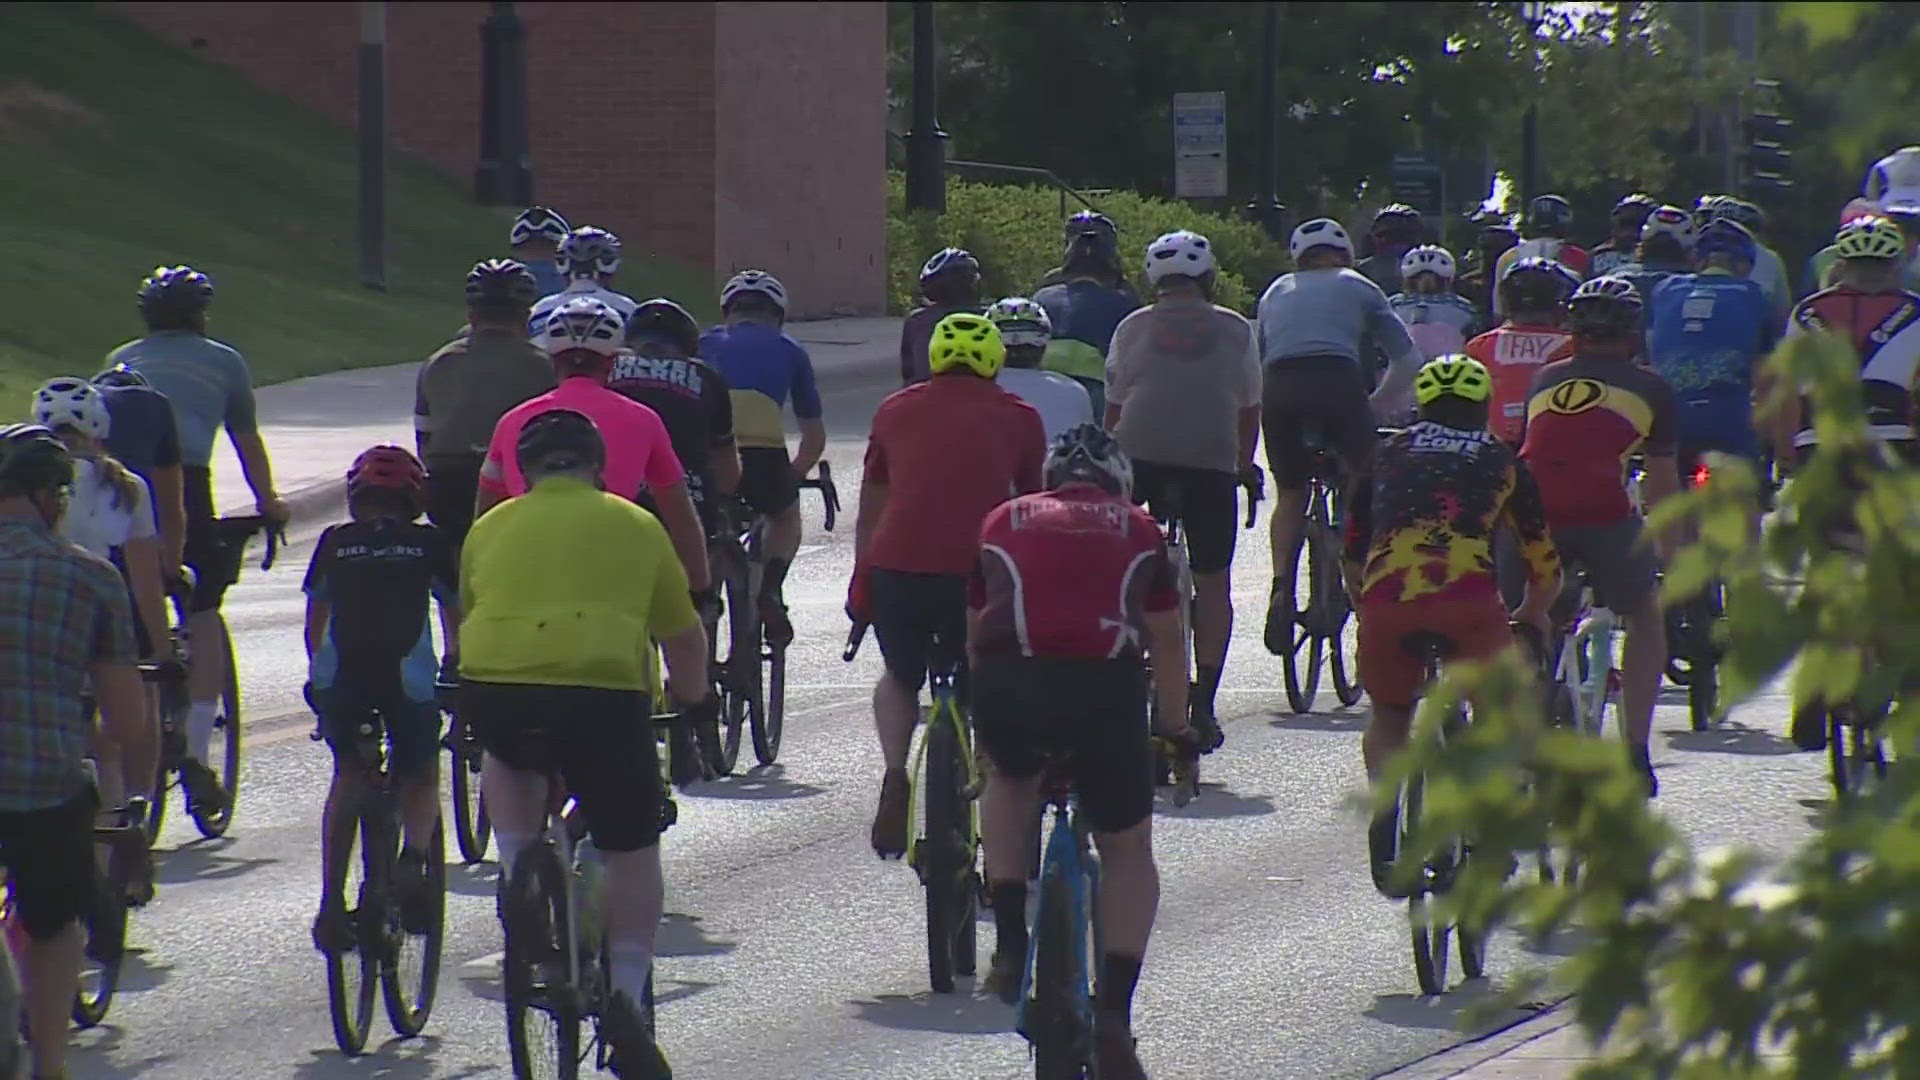 Although this is the first Graveler ride, organizers say they plan to continue the tour as a yearly tradition.